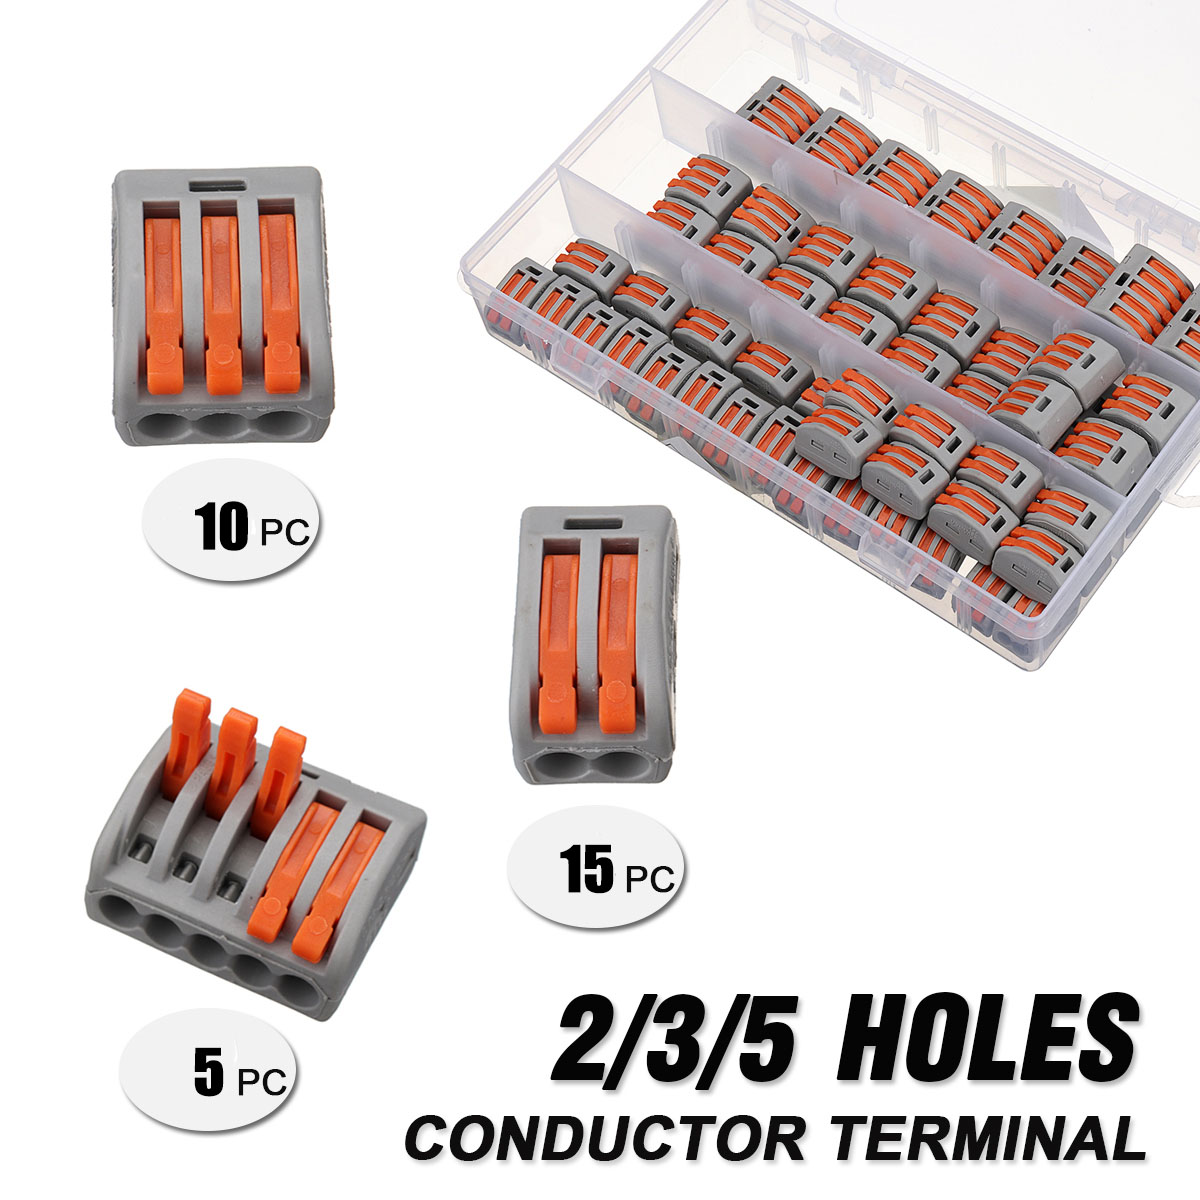 Excellwayreg-30Pcs-235-Holes-Spring-Conductor-Terminal-Block-Electric-Cable-Wire-Connector-1389031-1